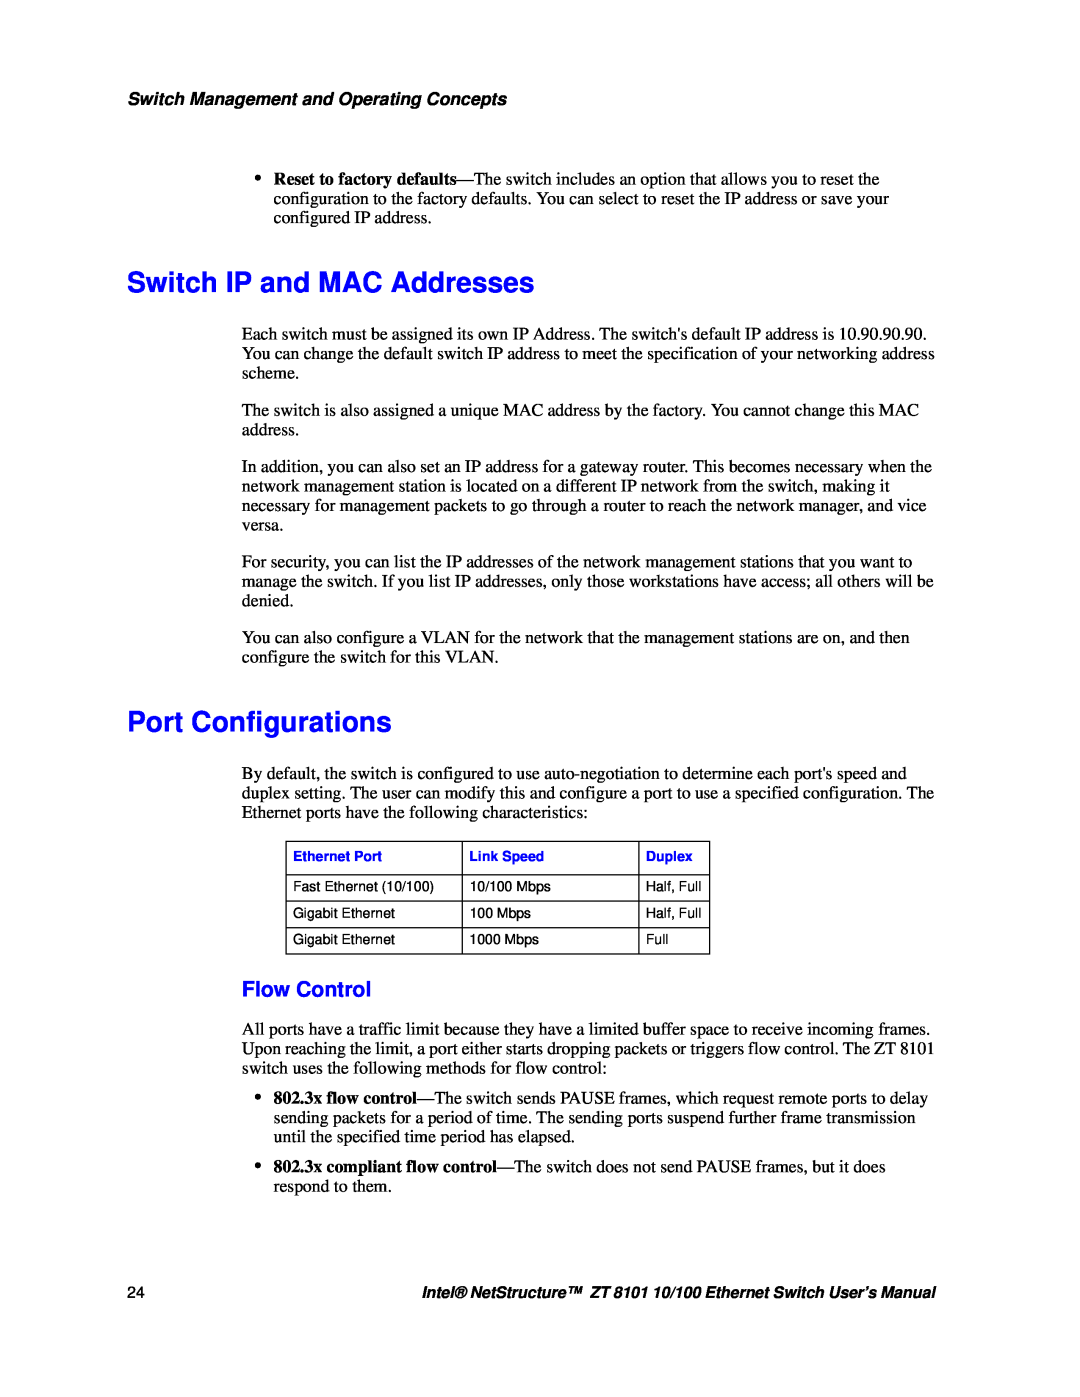 Intel ZT 8101 10/100 user manual Switch IP and MAC Addresses, Port Configurations, Flow Control 